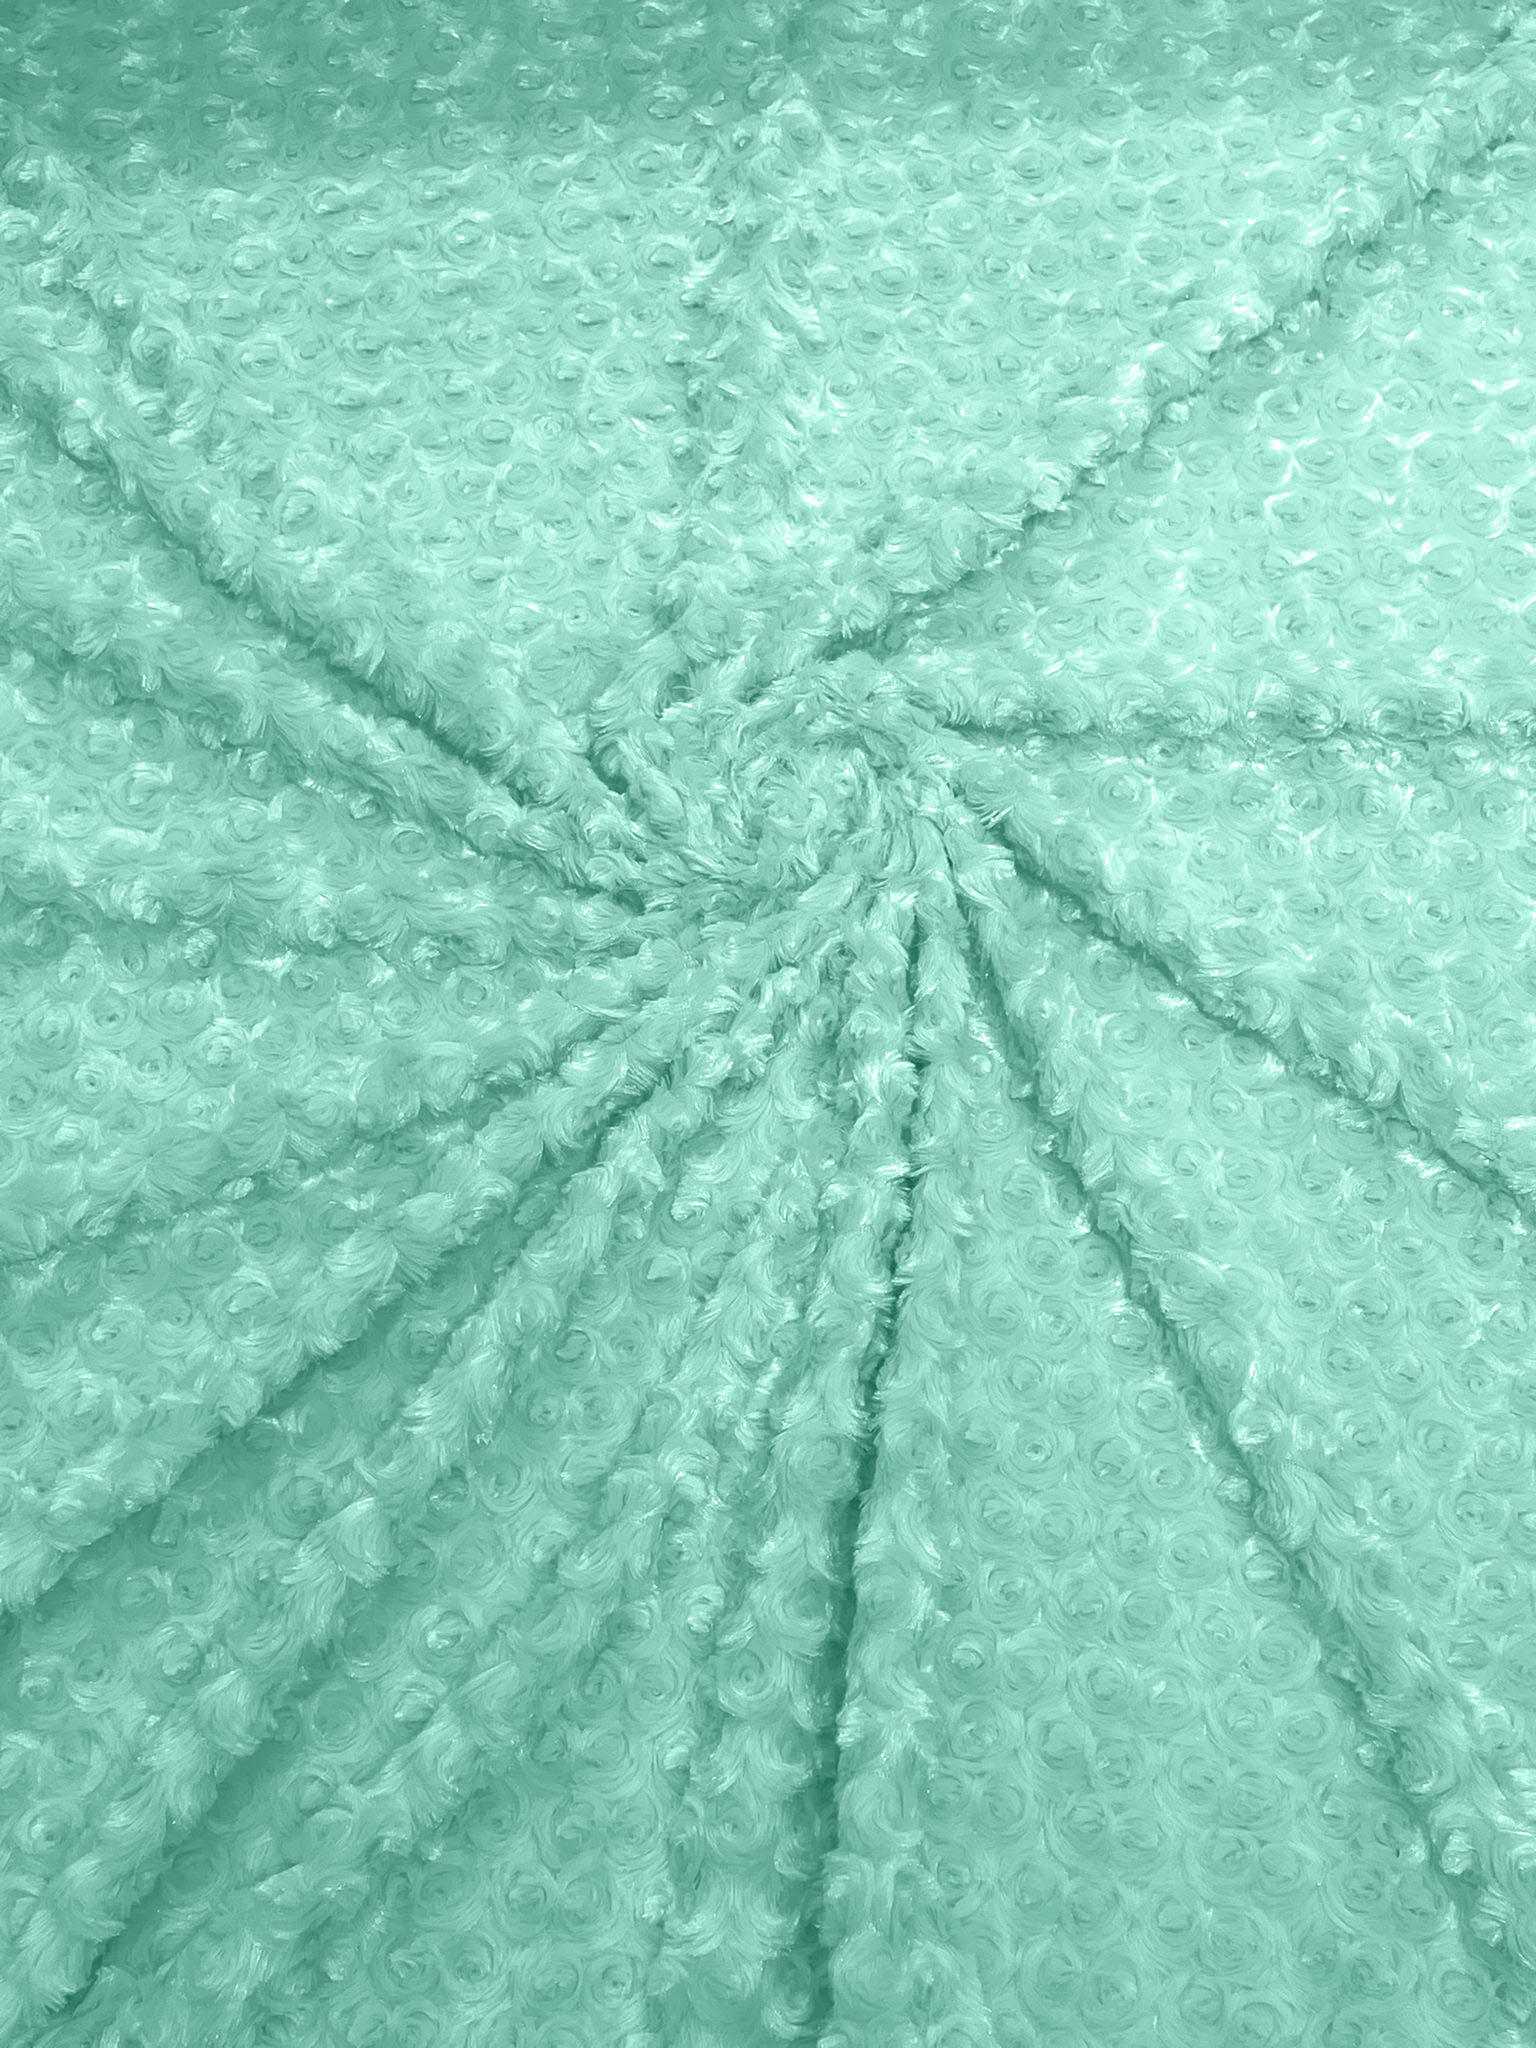 Icy Mint - Minky Swirl Rose Blossom Ball Rosebud Plush Fur Fabric Polyester- 58" Wide Sold By The Yard